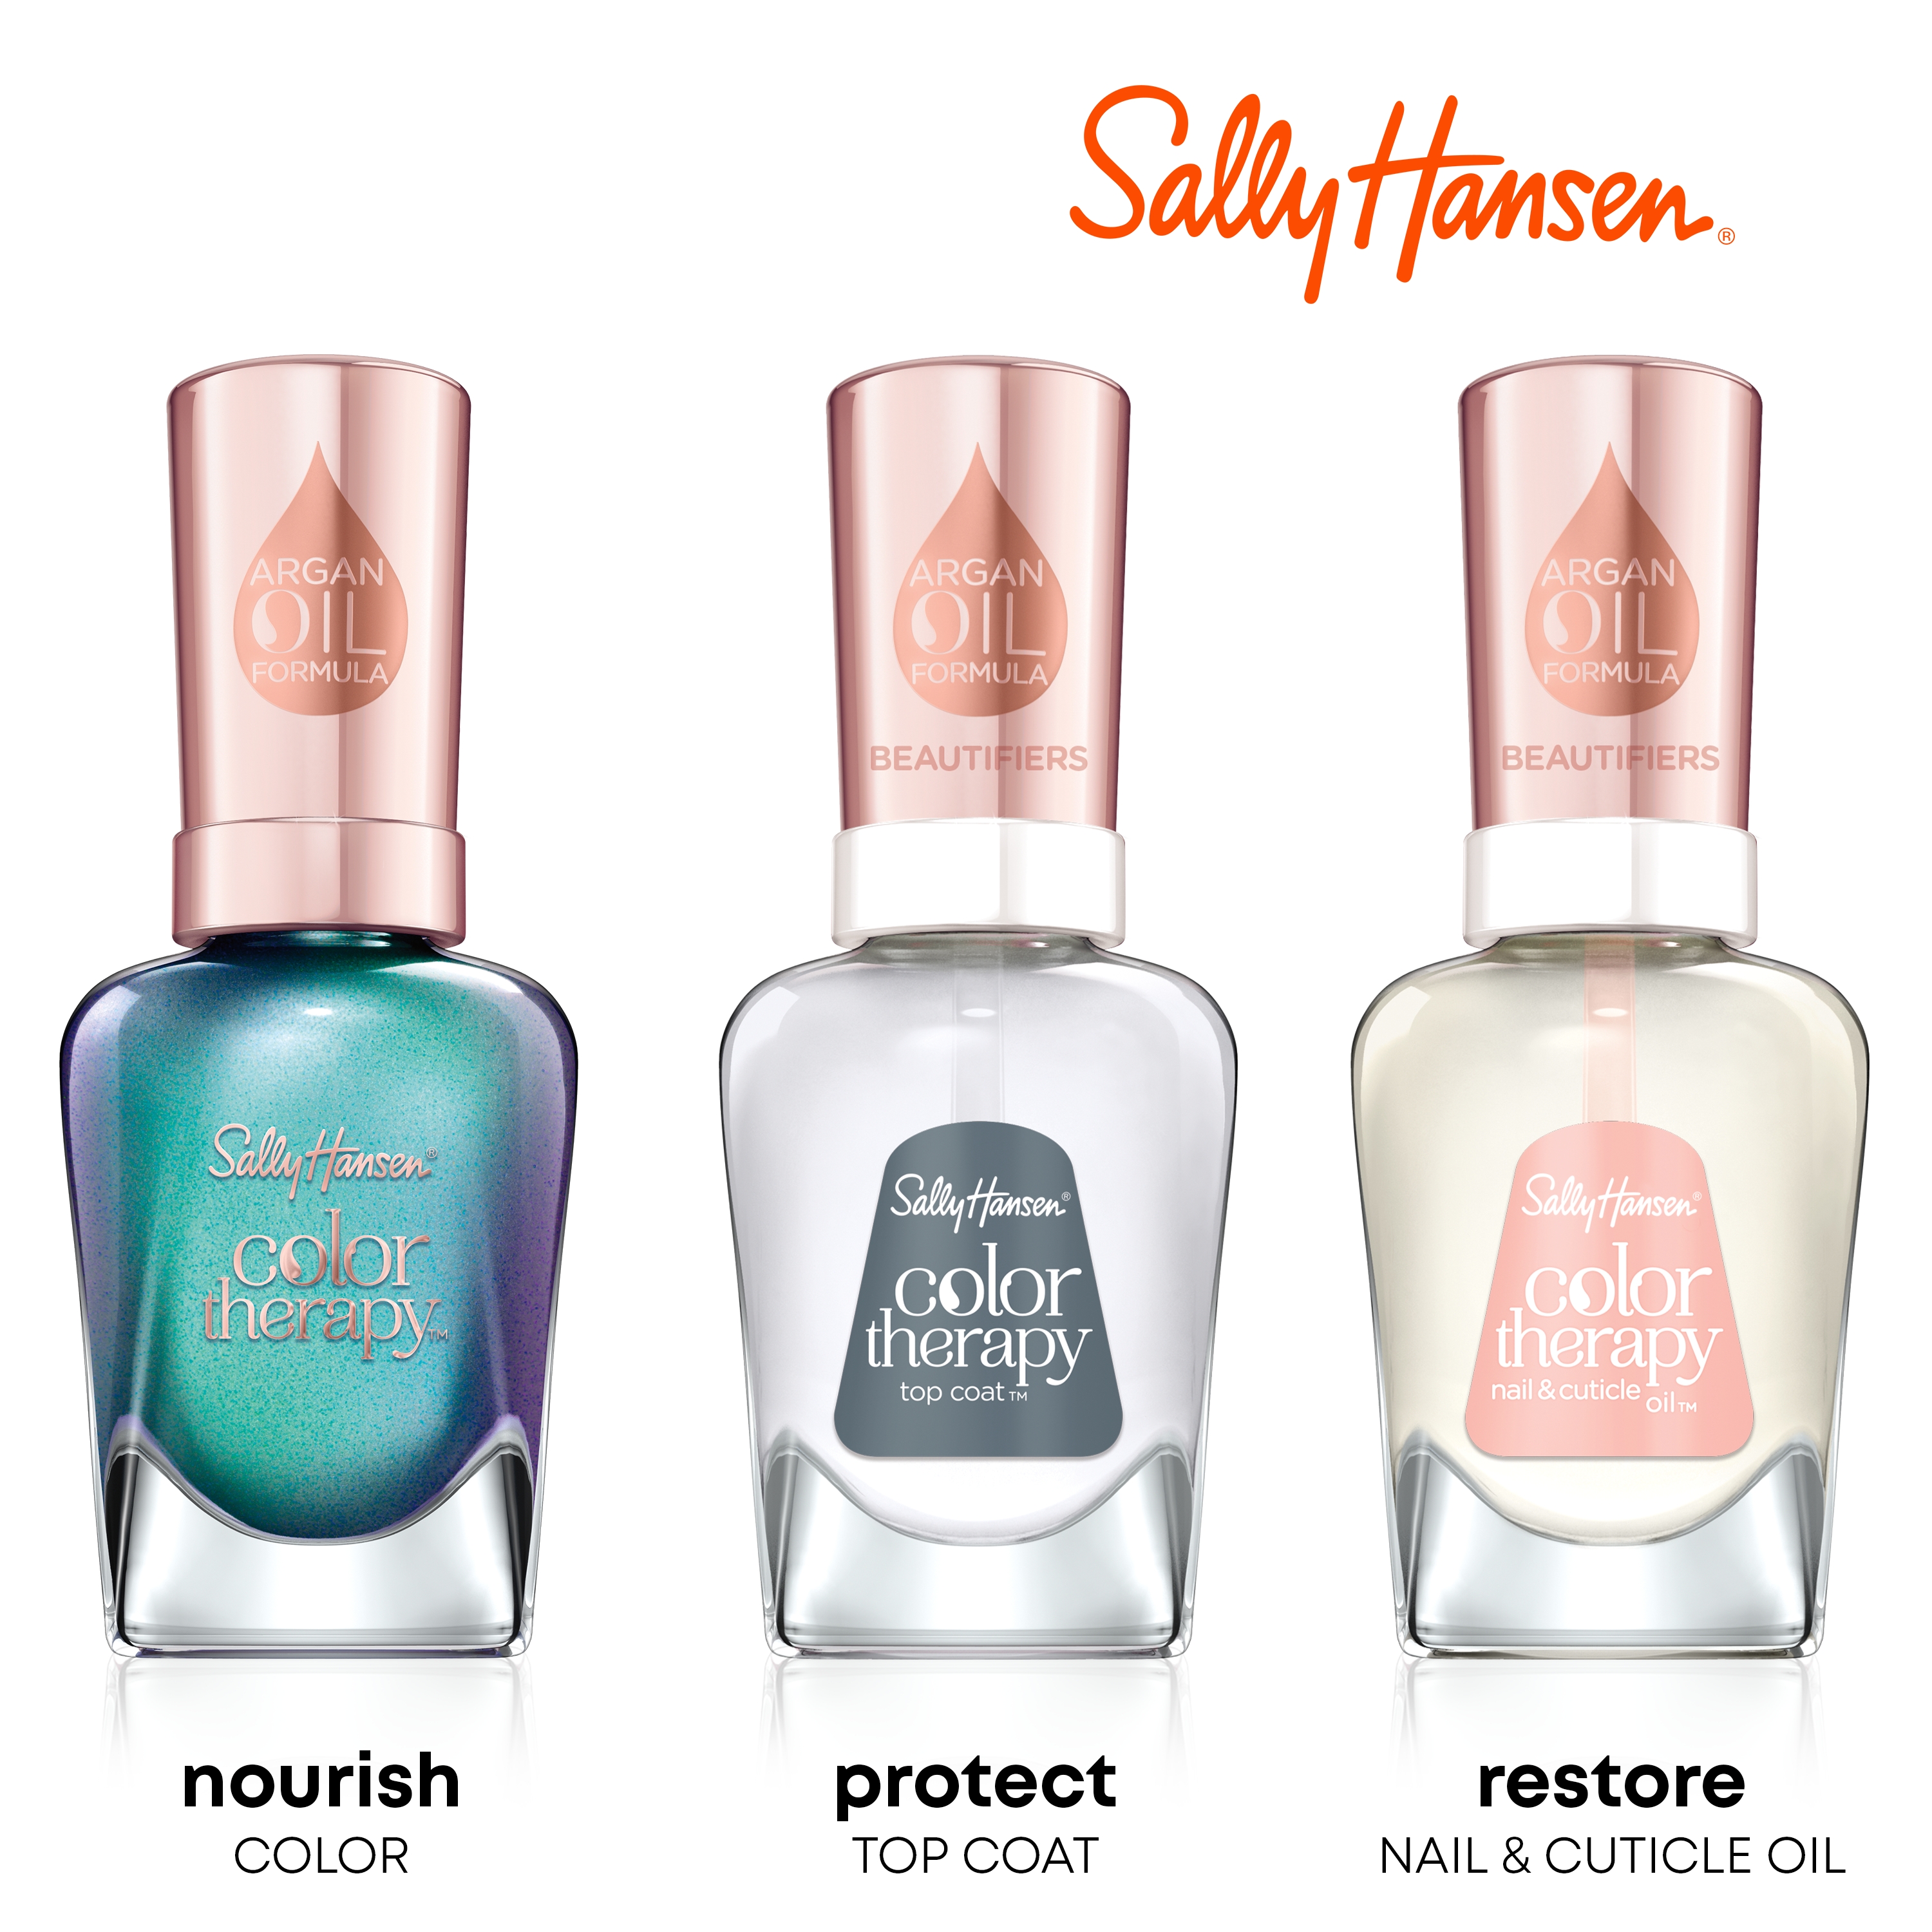 Sally Hansen Color Therapy Nail Color, In My Element, 0.5 oz, Color Nail Polish, Nail Polish, Nail Polish Colors, Restorative, Argan Oil Formula, Instantly Moisturizes - image 5 of 13